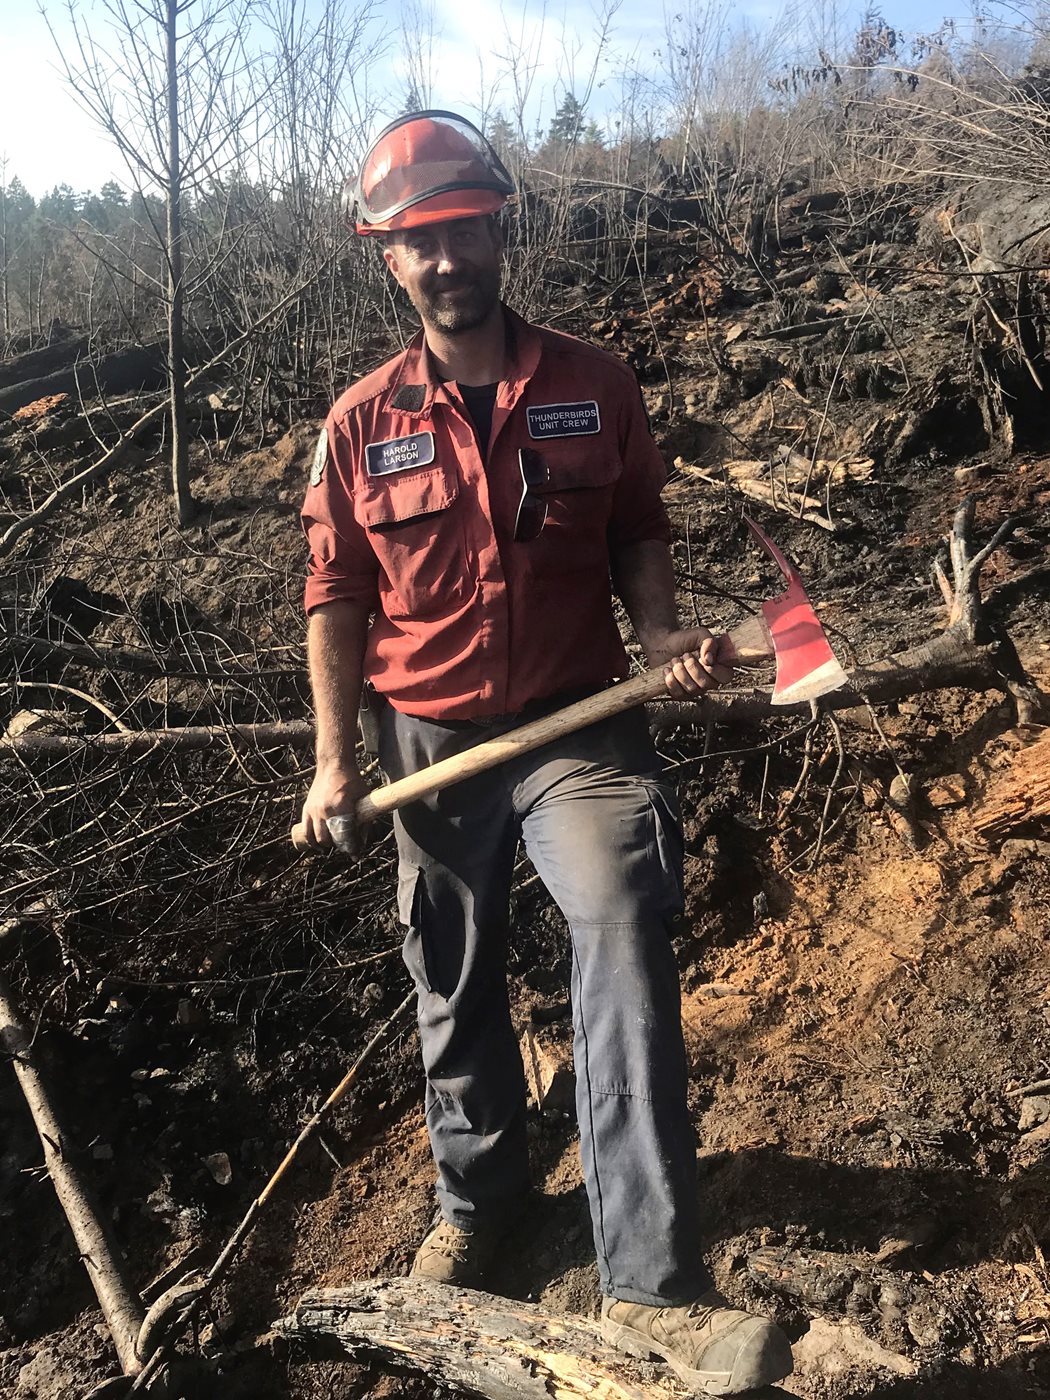 Harold Larson stands with an axe at a wildland fire site.